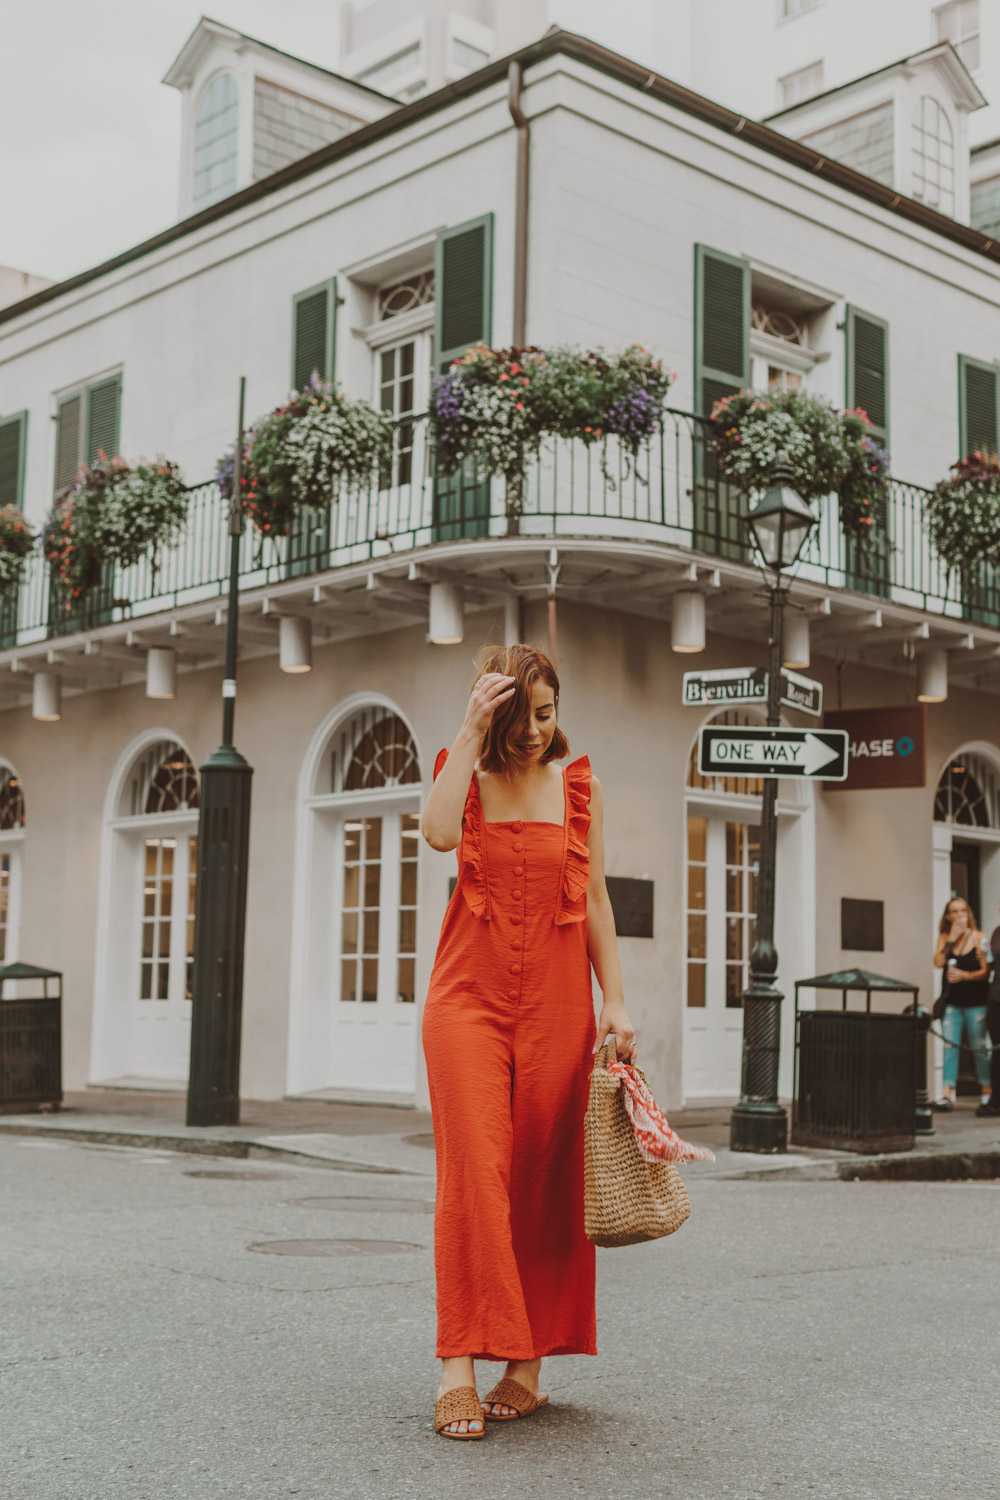 new orleans outfit fall | new orleans outfit fall street styles | new orleans outfit fall going out | new orleans outfit fall black women | new orleans jazz aesthetic outfit | new orleans jazz festival outfit | new orleans jazz fest outfit | new orleans wedding guest outfit winter | new orleans wedding guest outfit fall